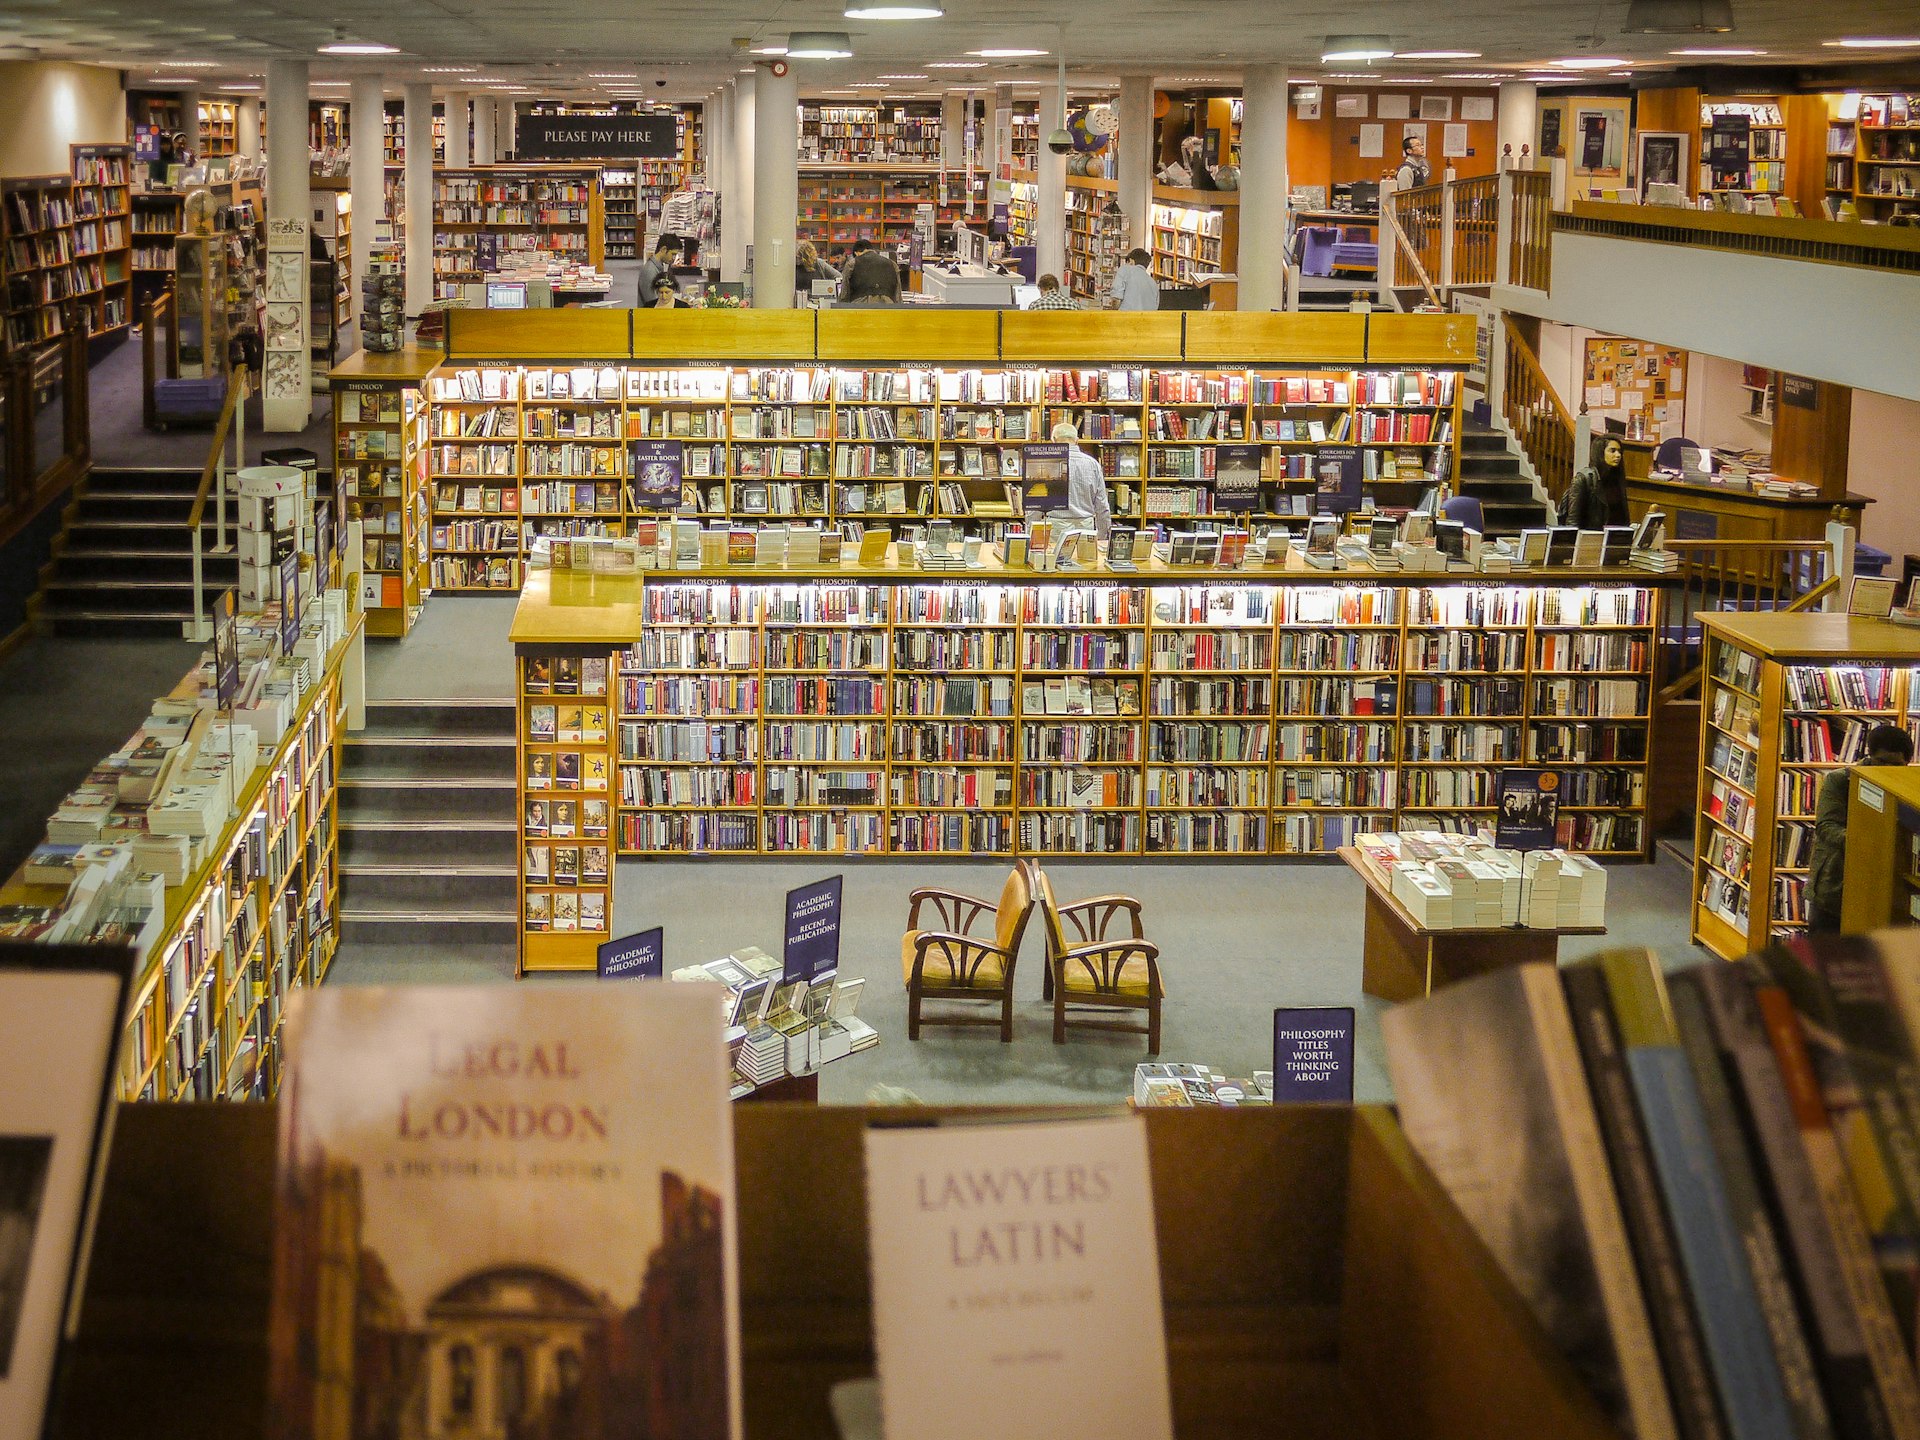 A view of the many book-lined shelves in Blackwell's Bookshop, Oxford.